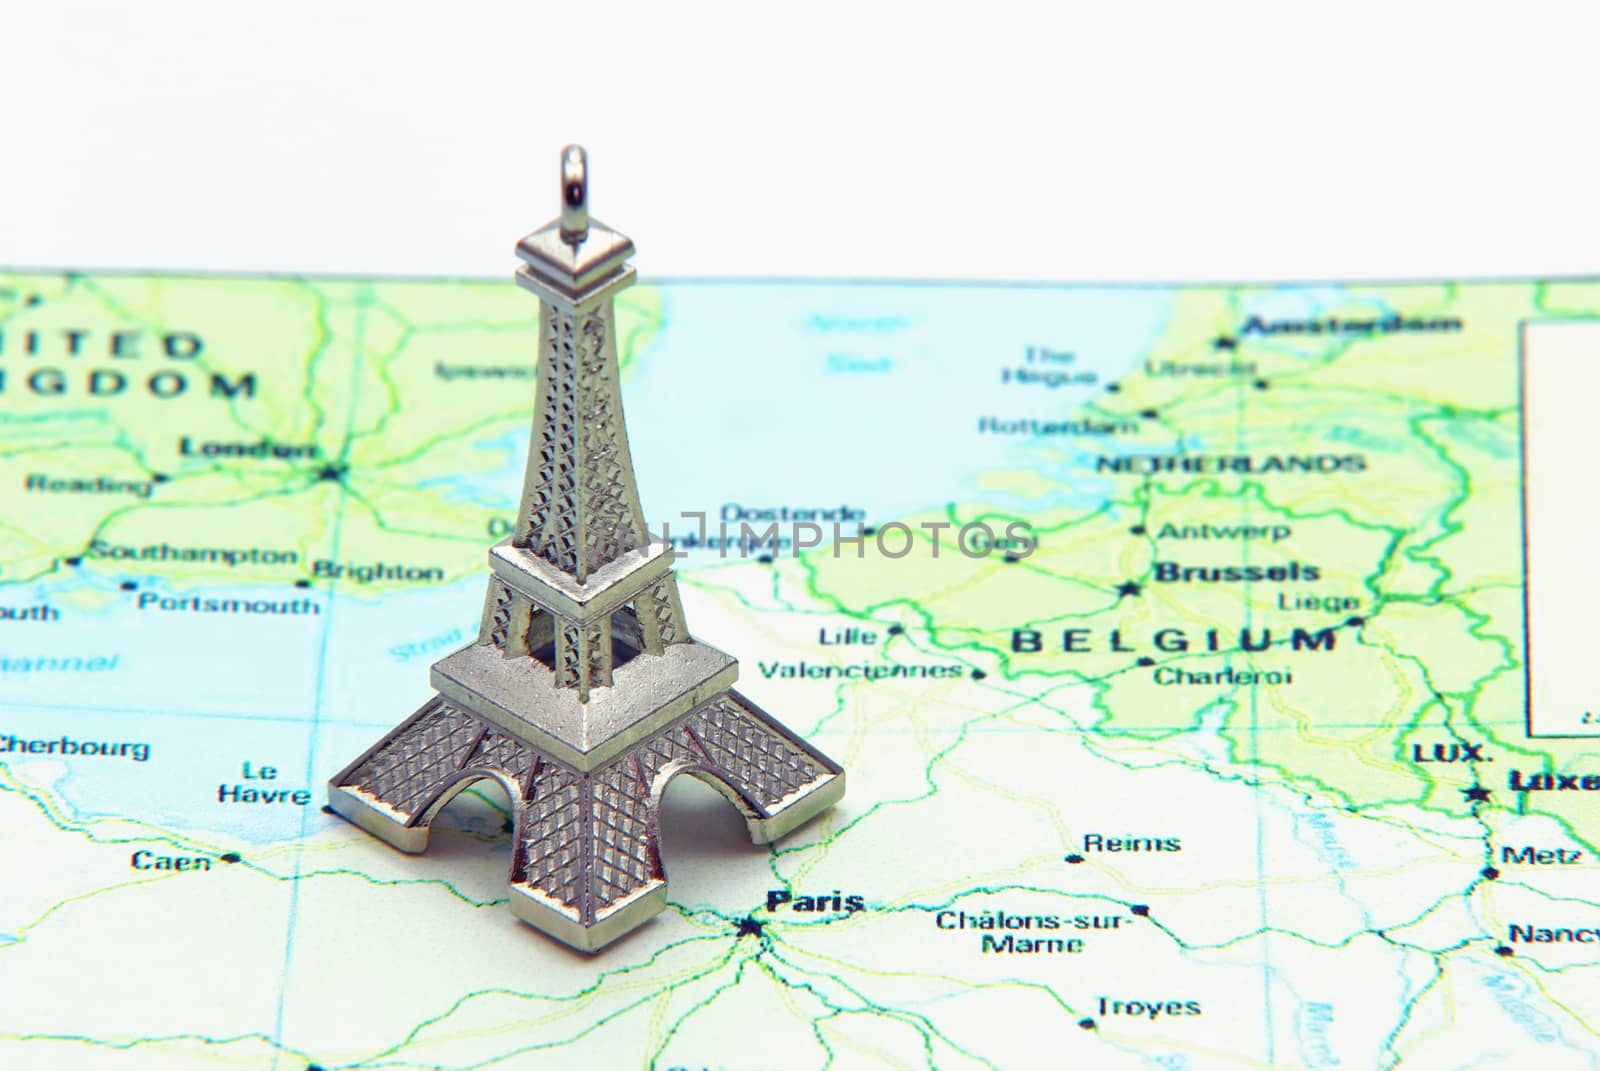 Statue of Eiffel Tower on a map of France